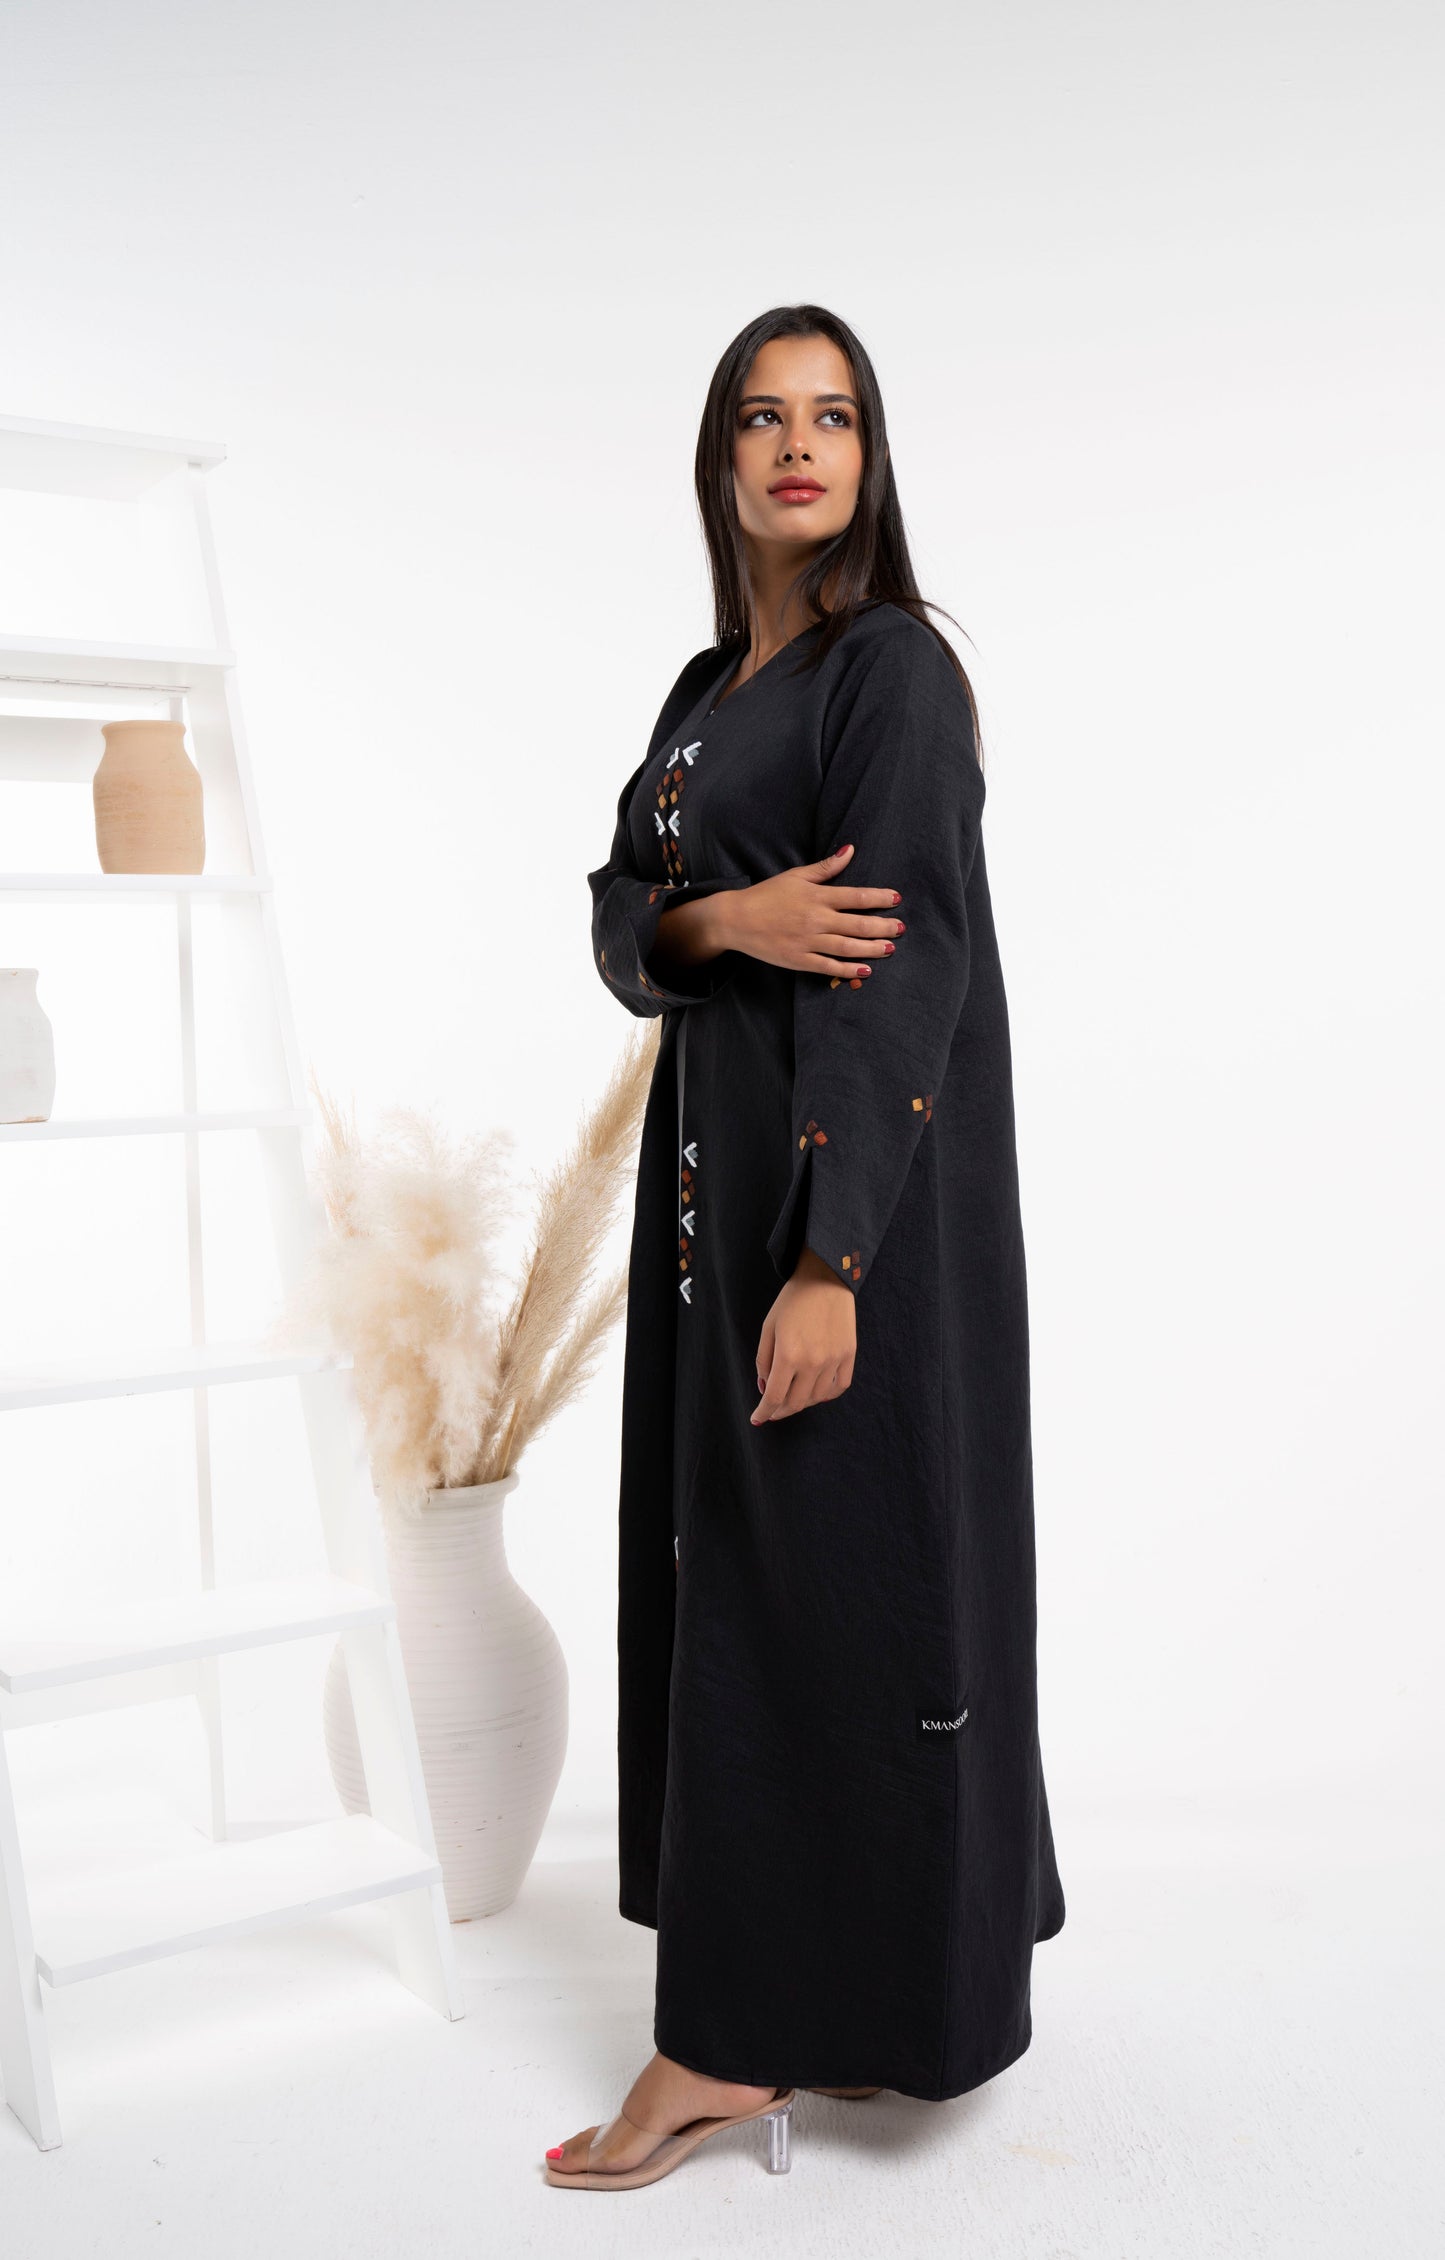 Girl wearing black abaya with thread embroidery on frontline and sleeves